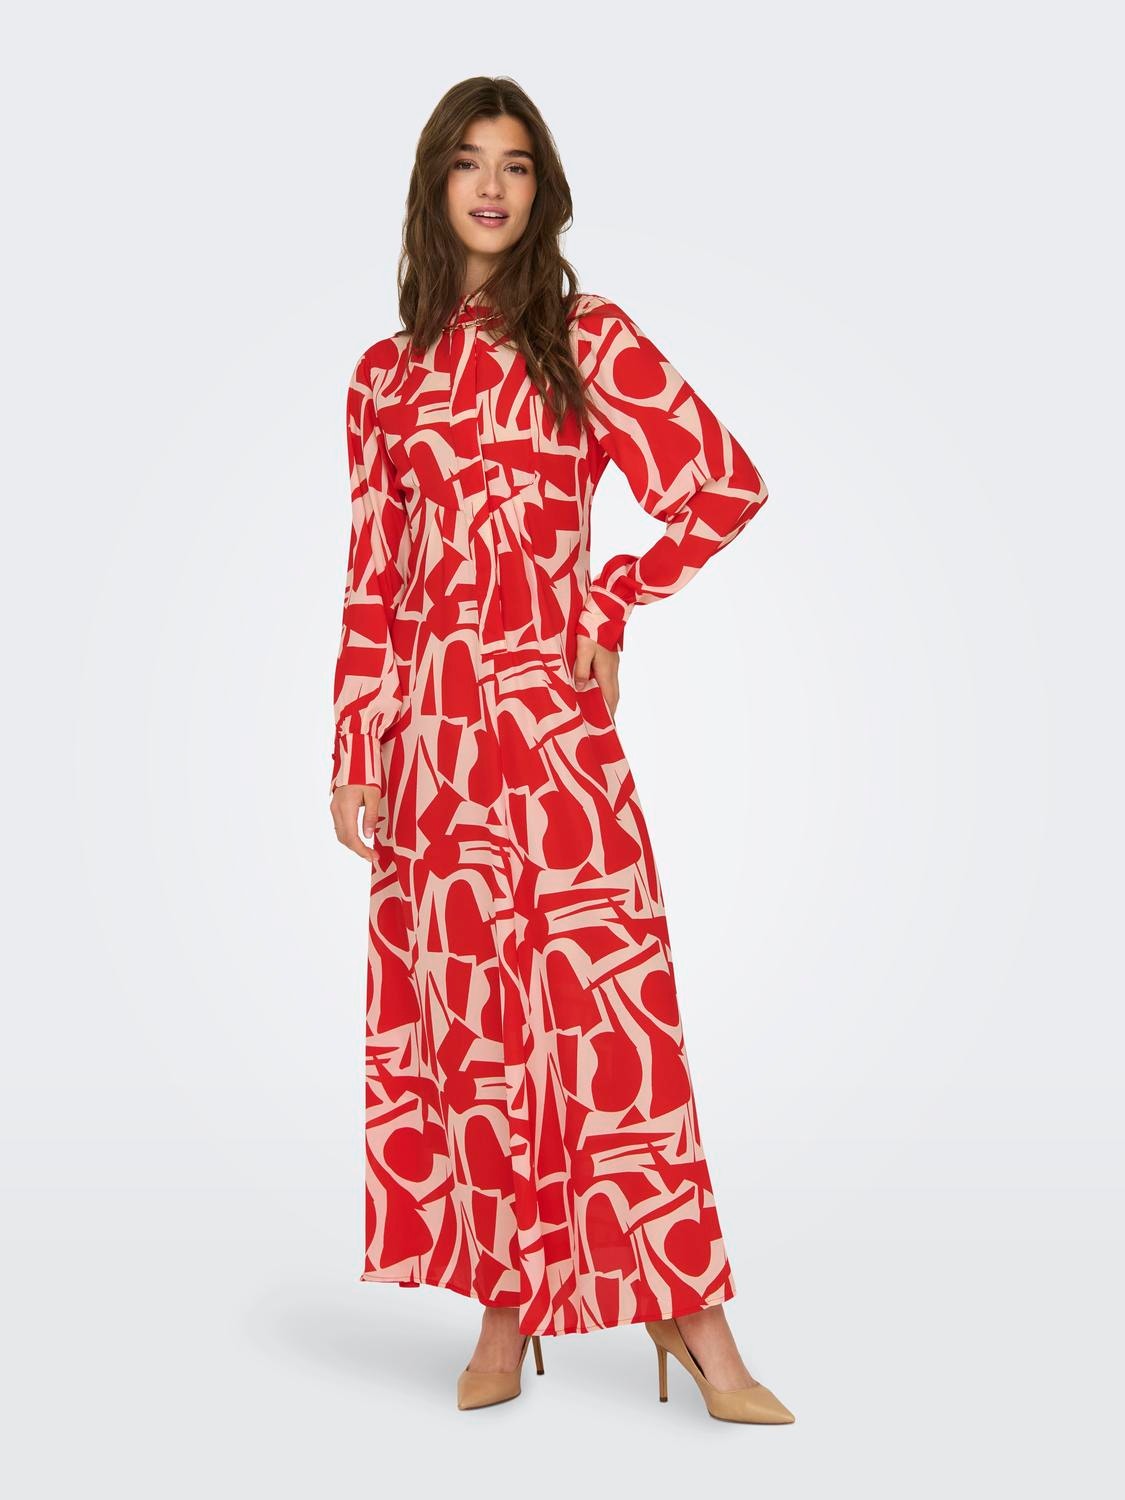 ONLY Maxi dress with china collar -Flame Scarlet - 15315463